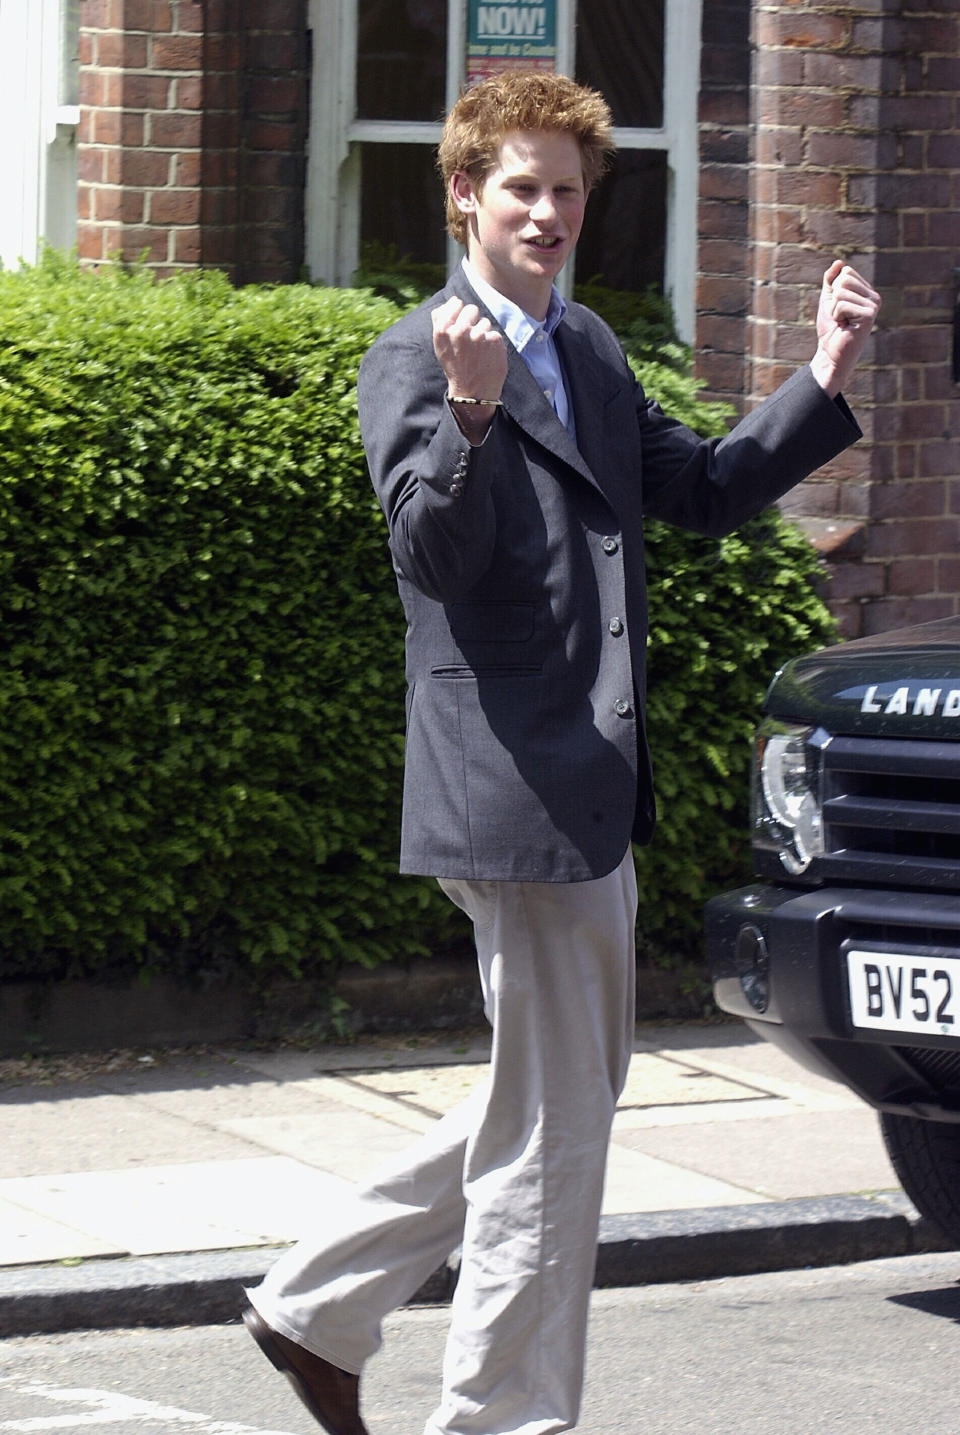 Prince Harry clenches his fist as he leaves Eton College on June 12, 2003.